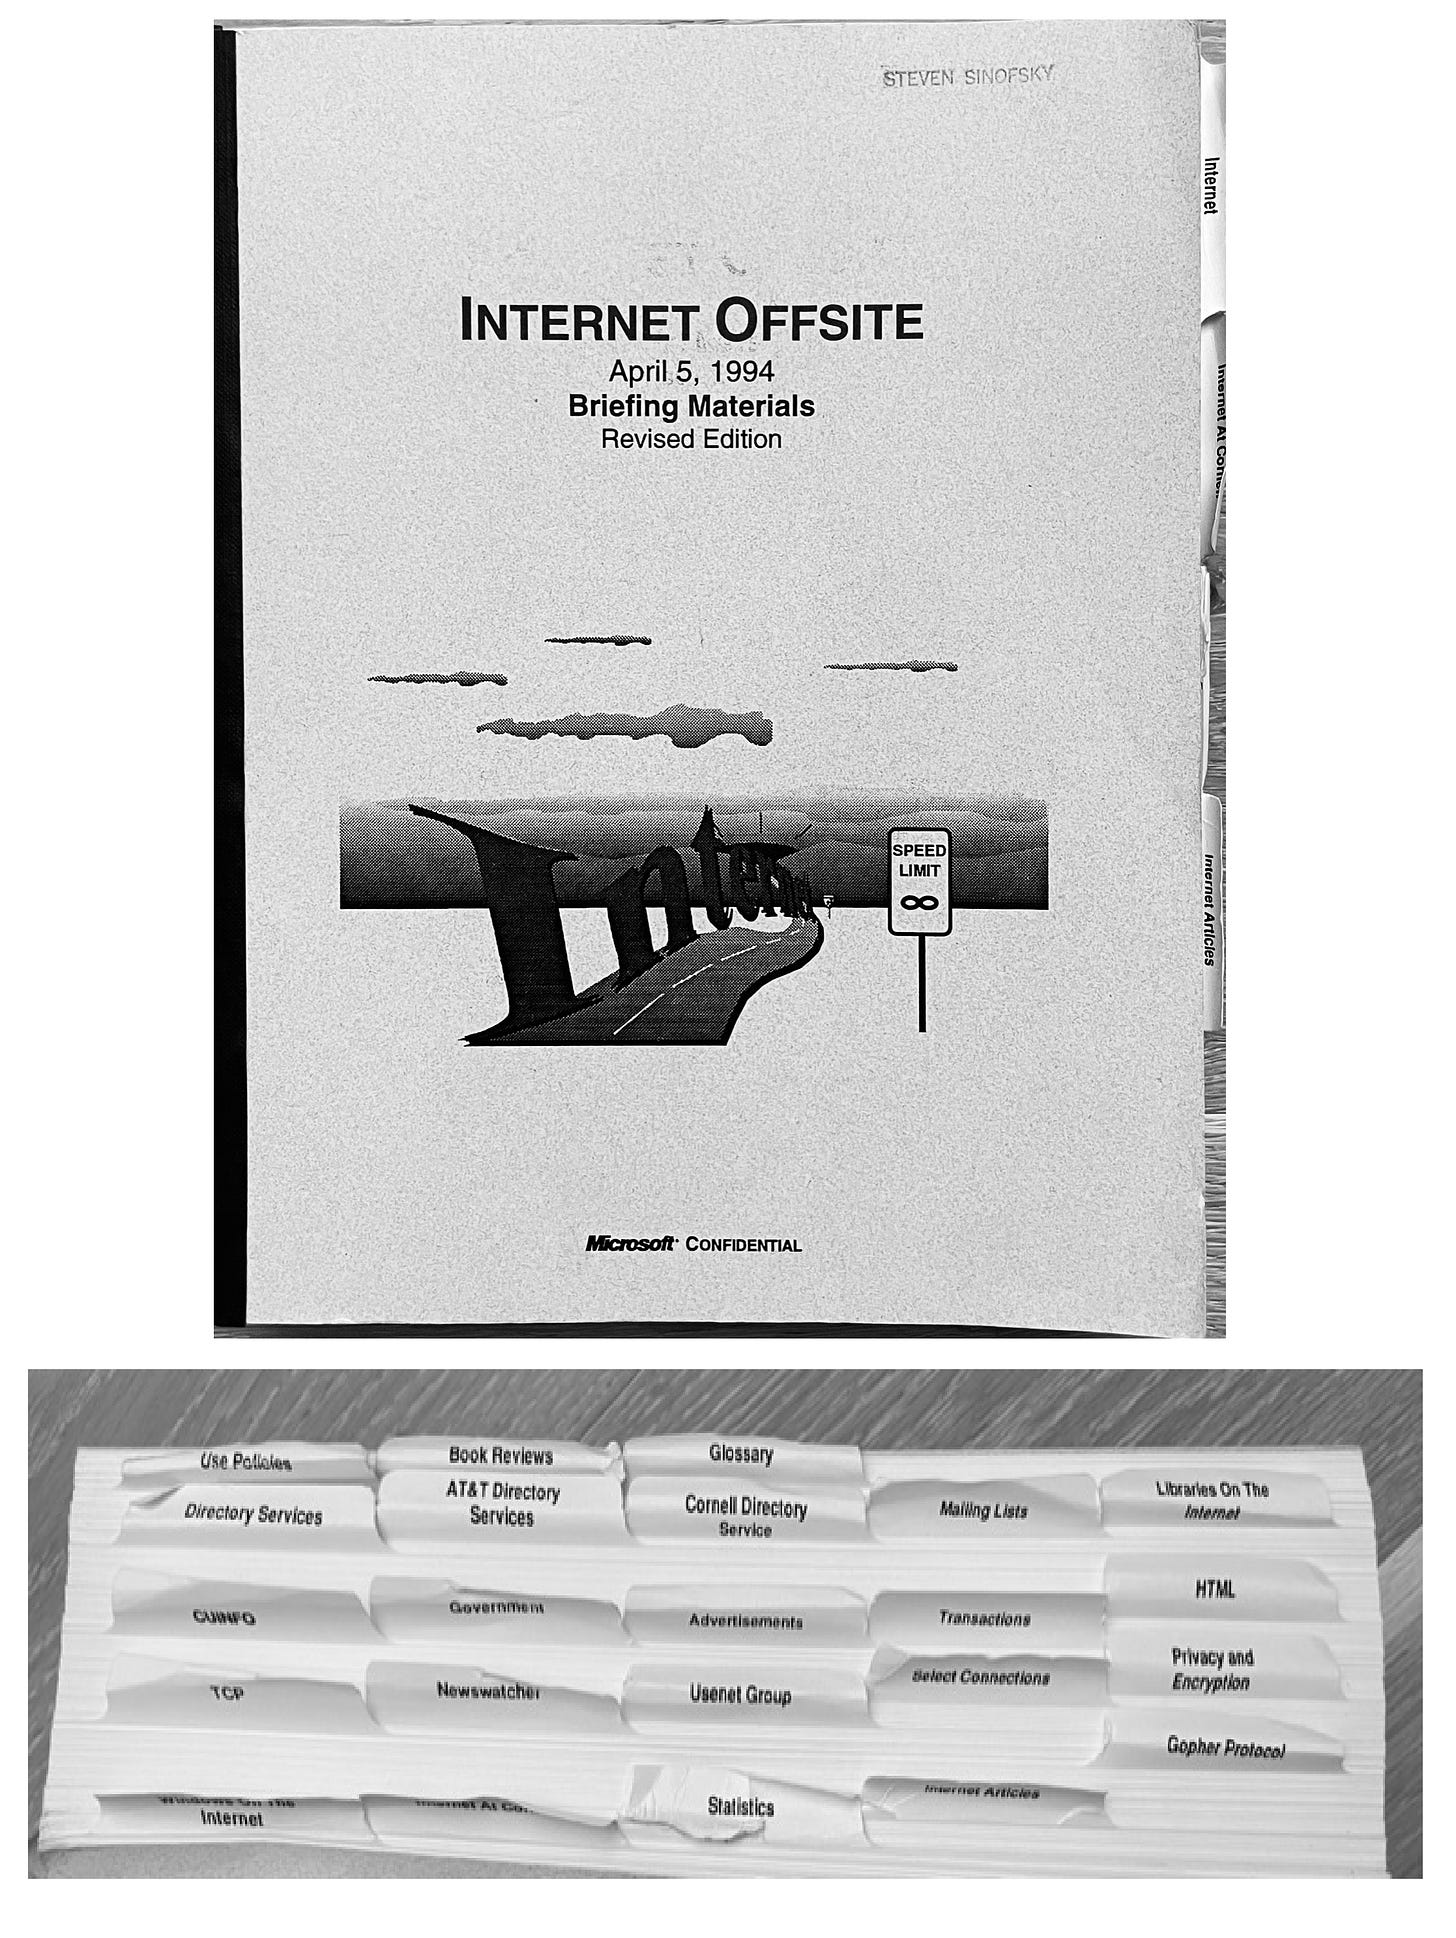 Photo of the internet offsite briefing book and a photo of the tabs dividing sections.